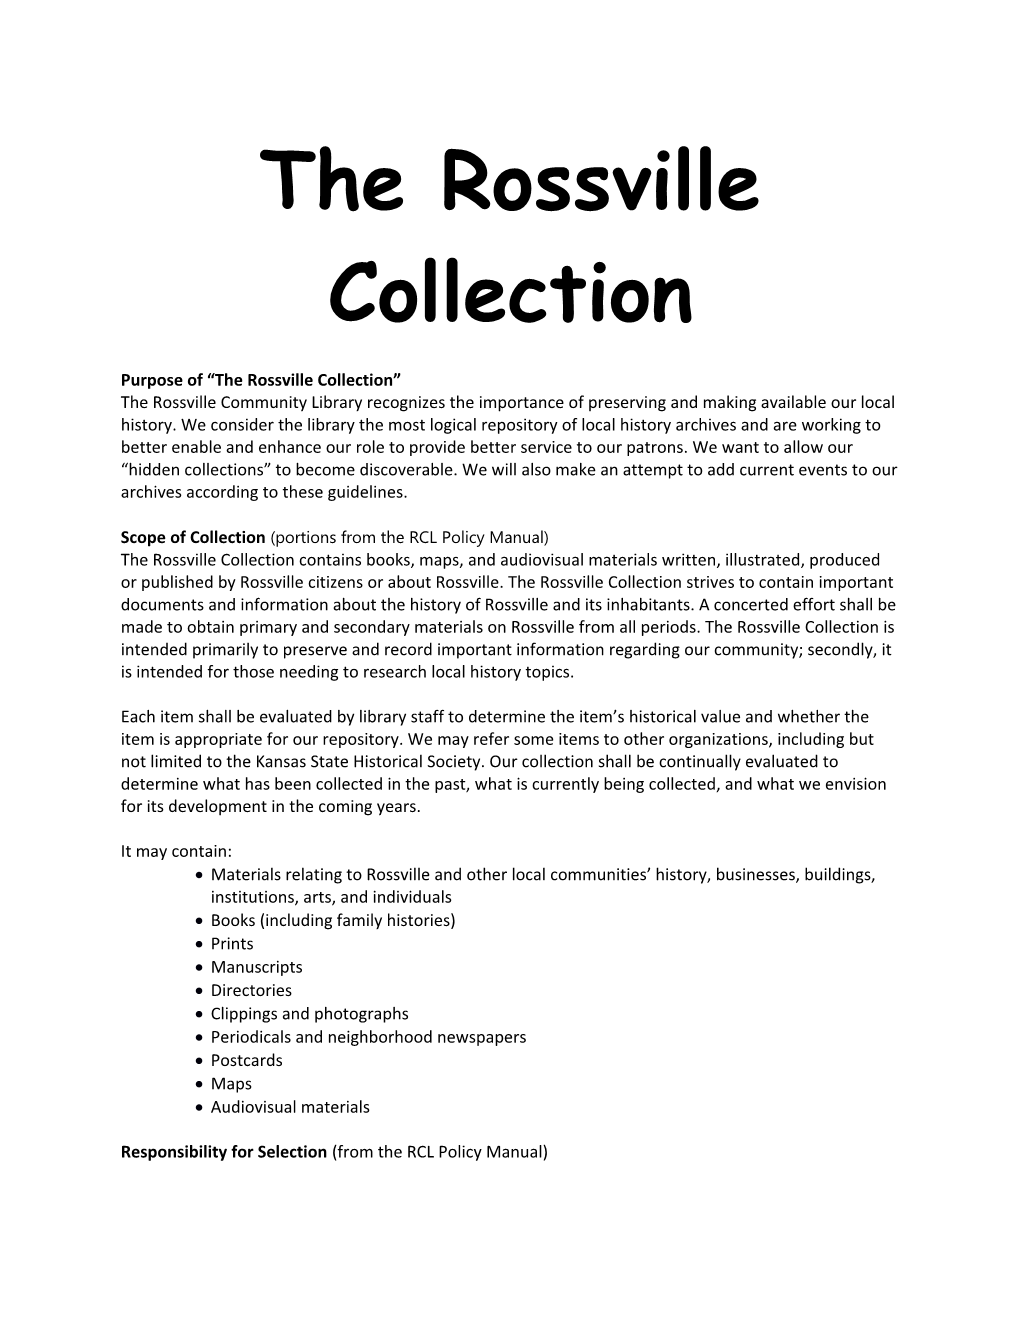 Purpose of the Rossville Collection